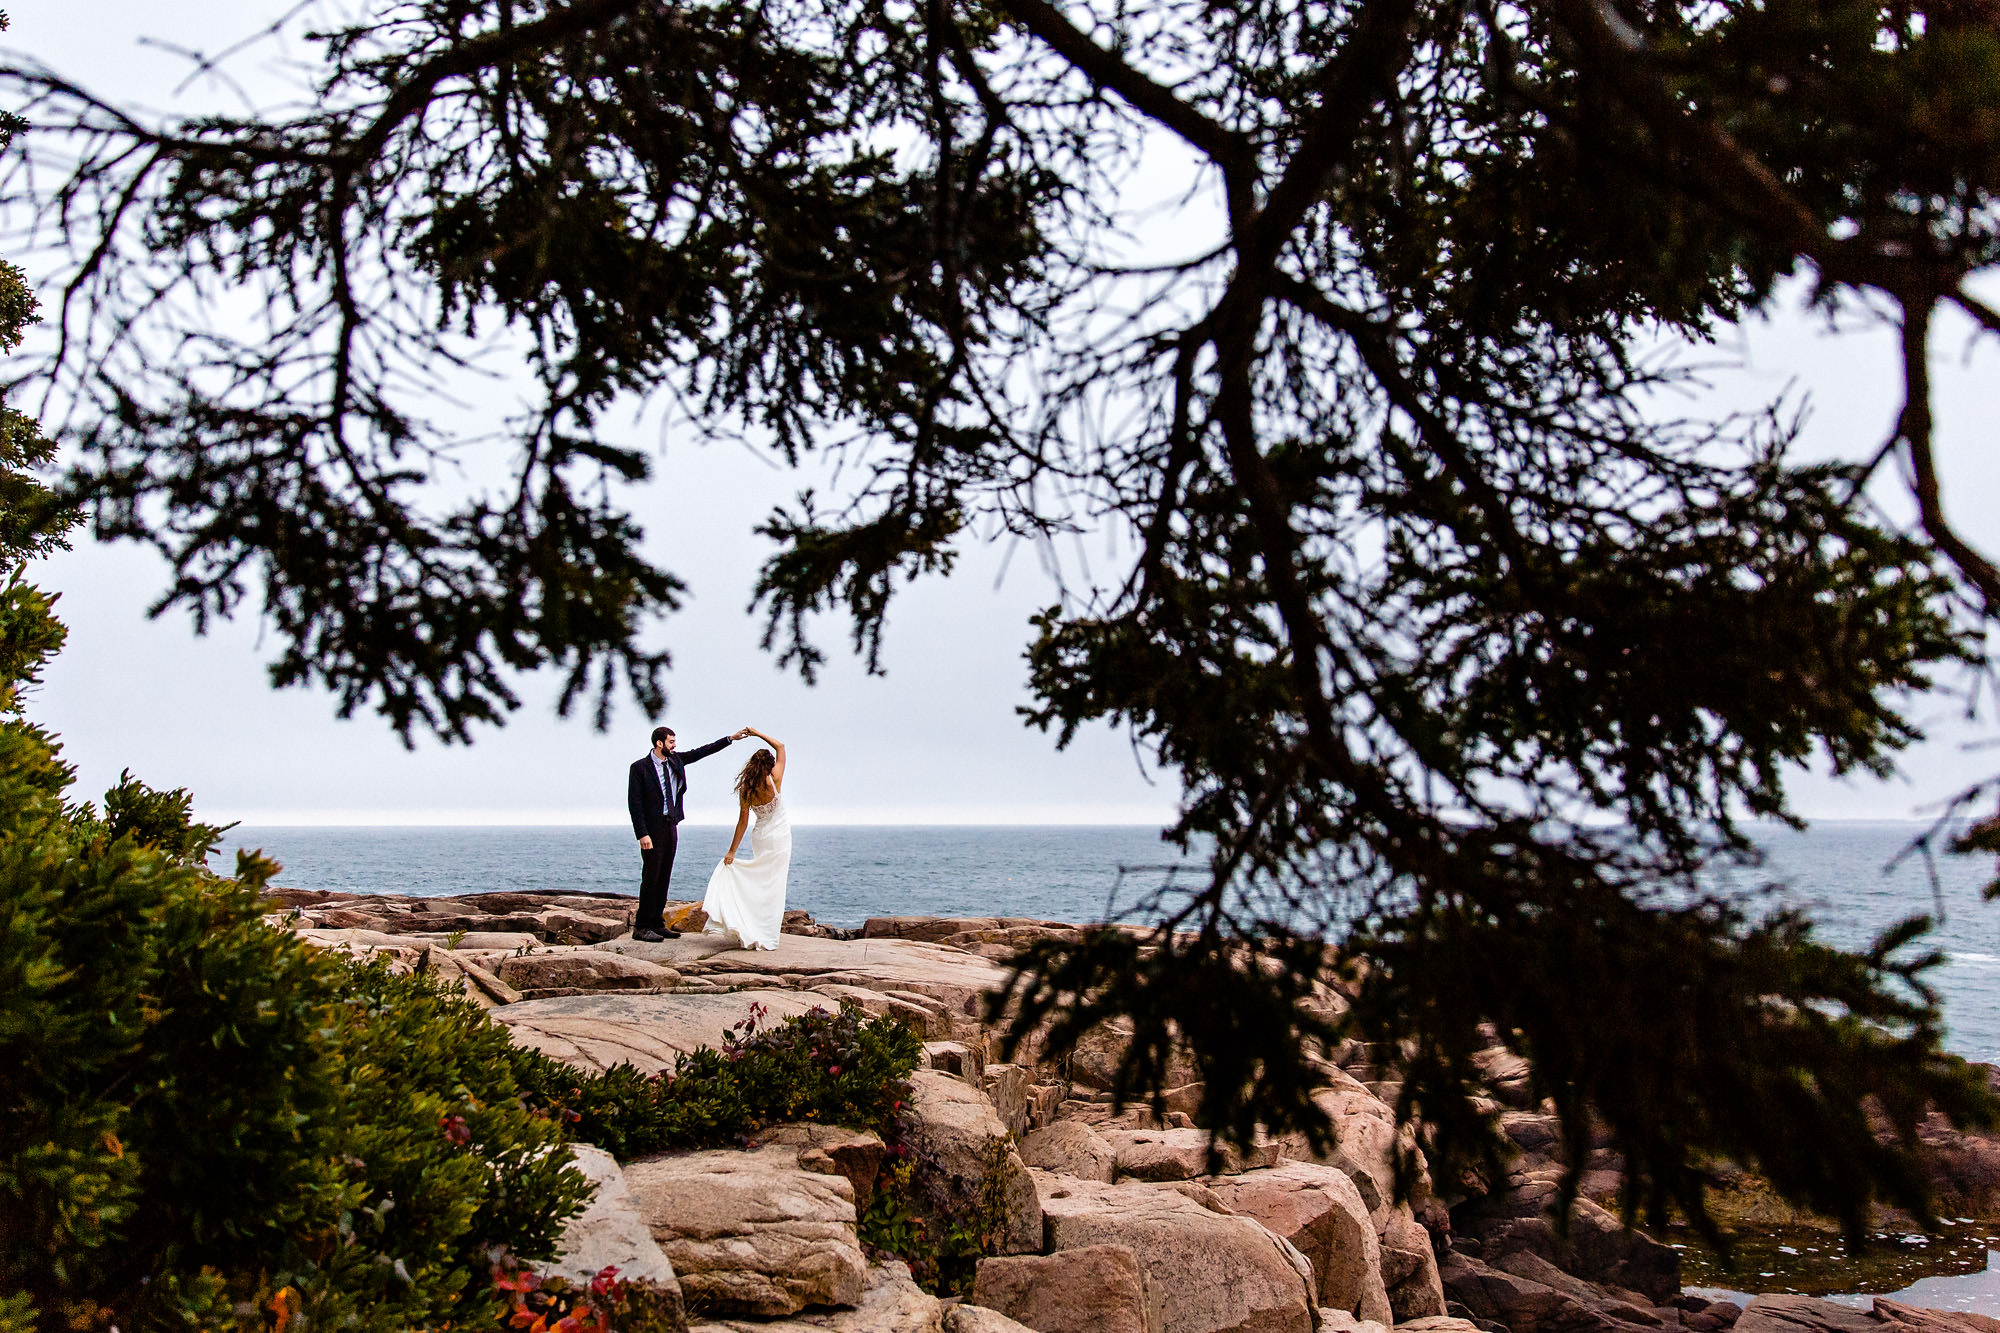 Wedding portraits at Otter Point in Acadia National Park